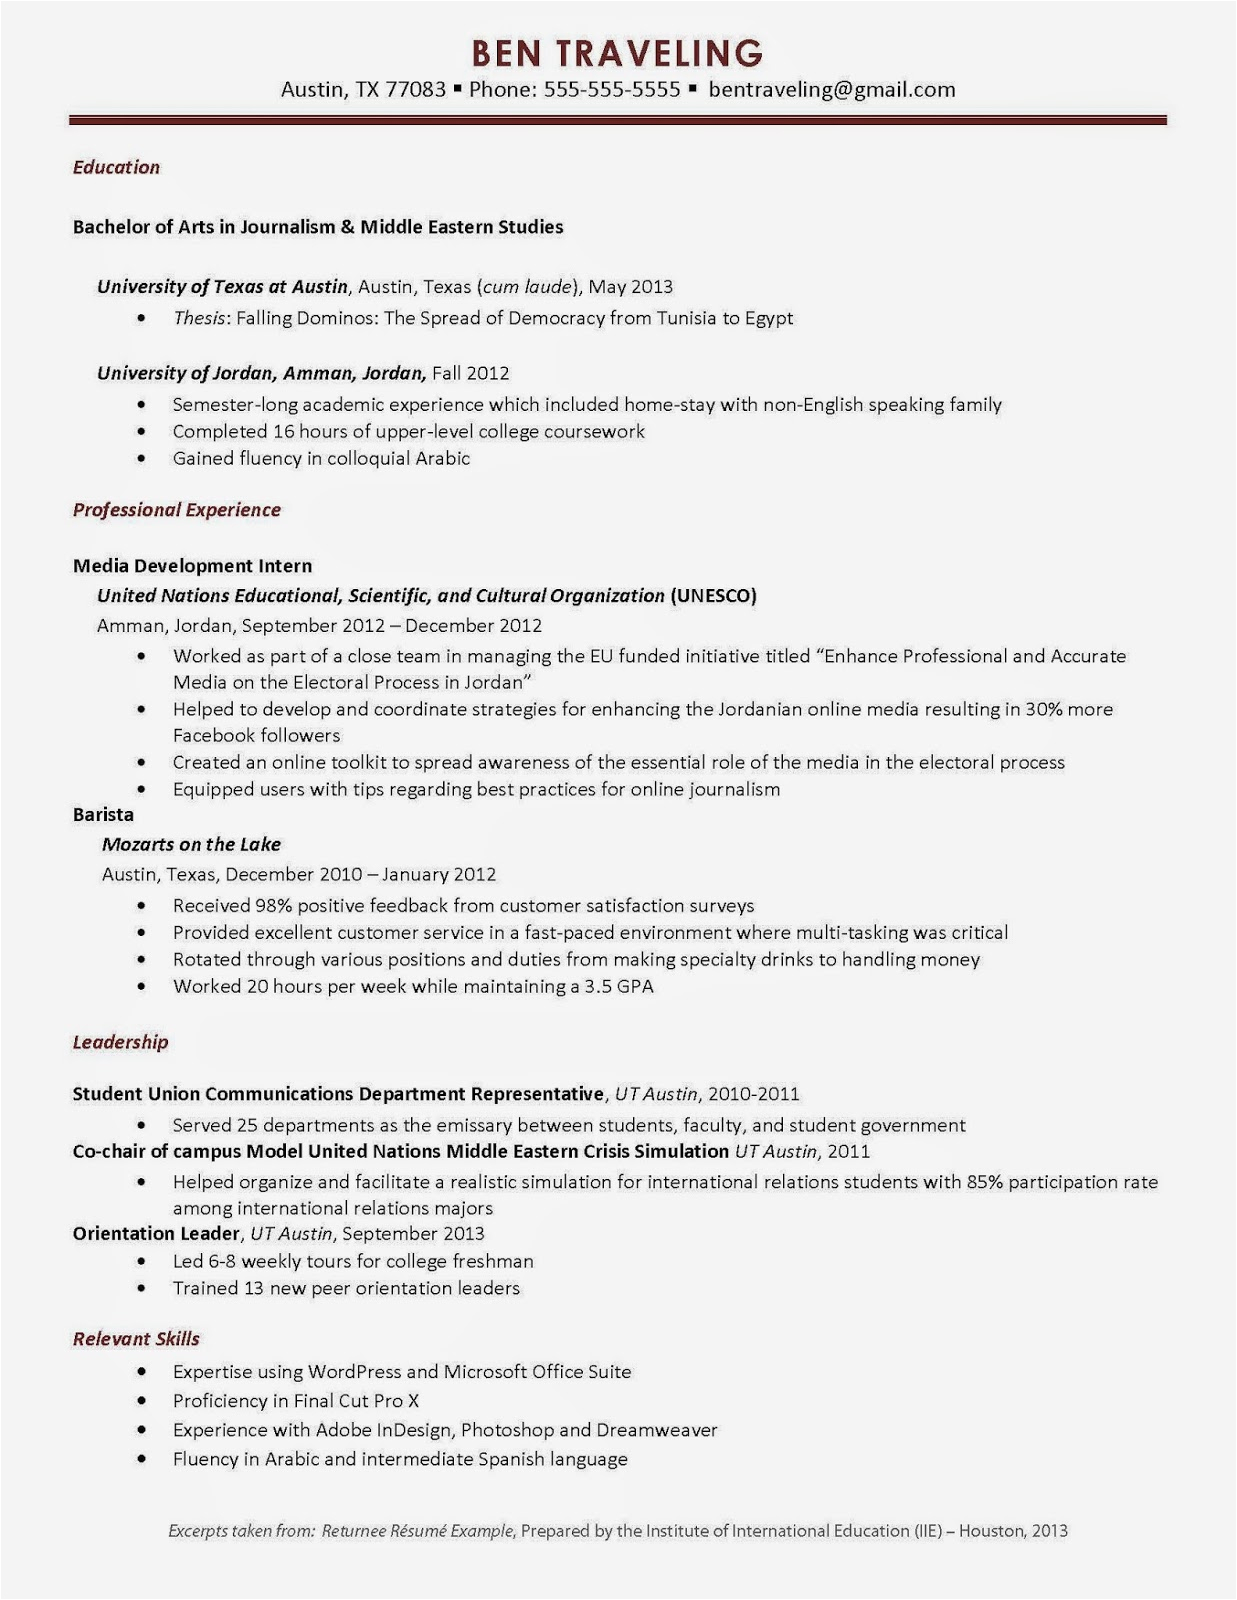 Sample Resume for Job Application Abroad University Of Arkansas Fice Of Study Abroad How Study